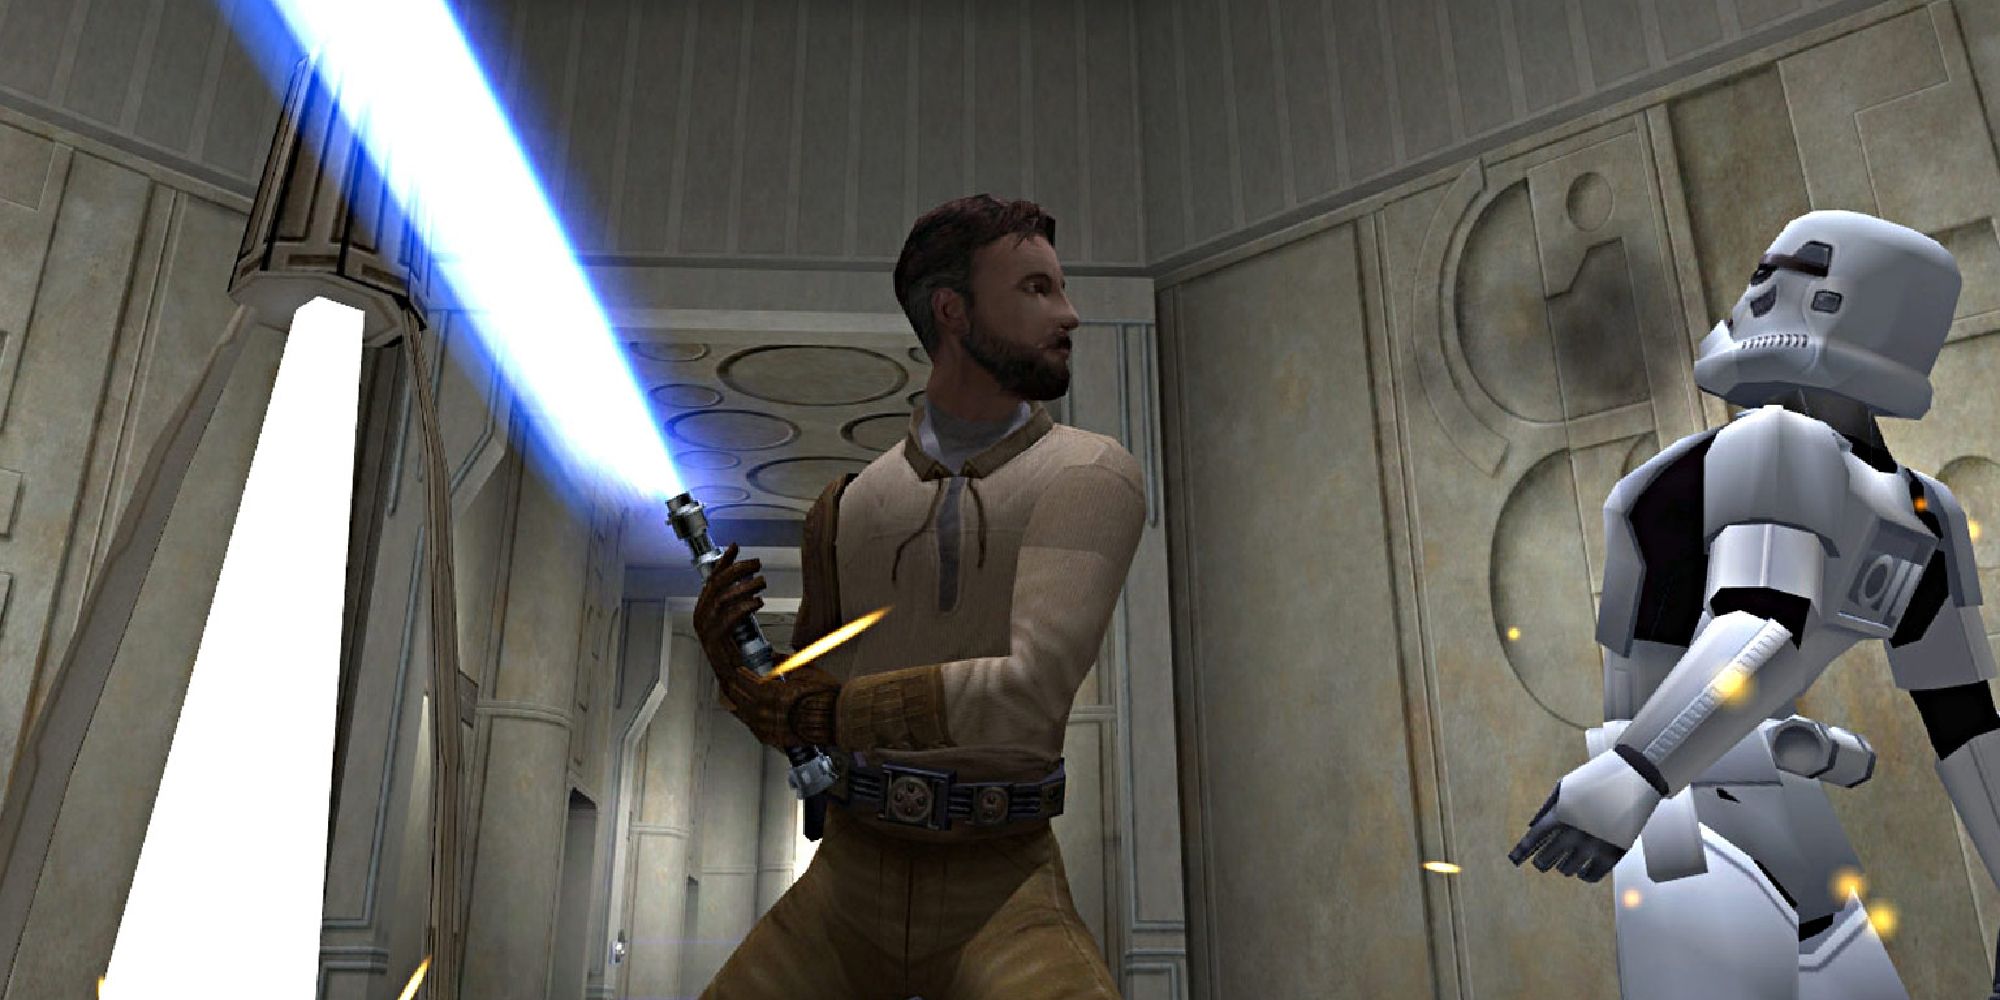 A player slashes an enemy stormtrooper with a lightsaber in Star Wars Jedi Knight 2: Jedi Outcasts